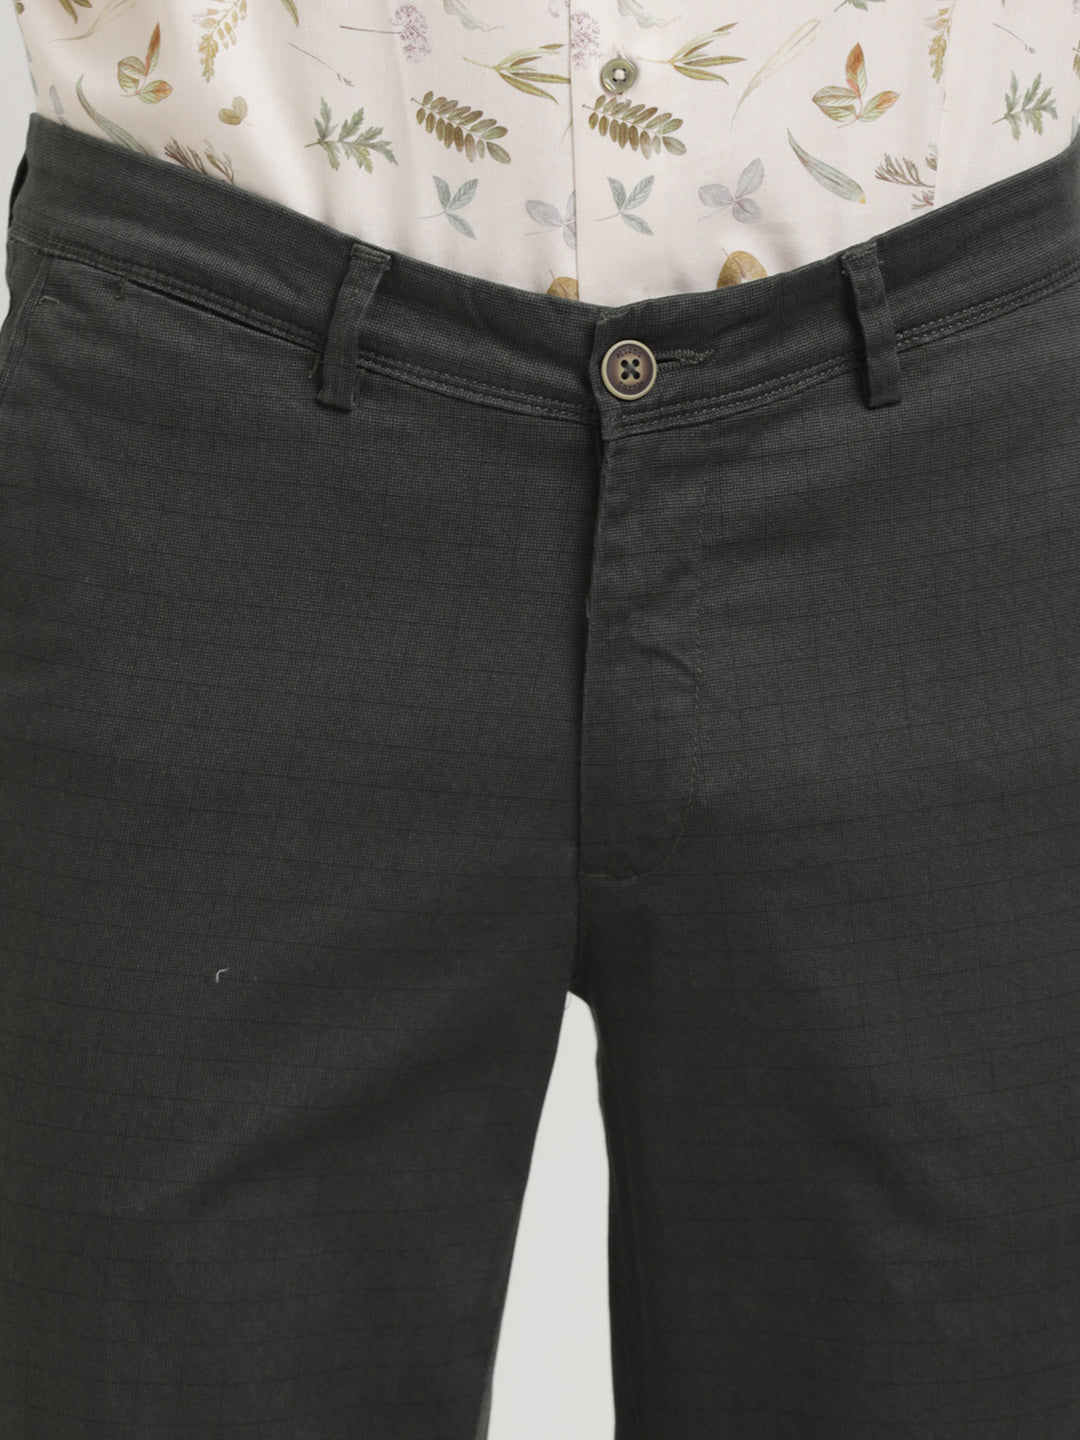 Cotton Stretch Charcoal Grey Printed Ultra Slim Fit Flat Front Casual Trouser